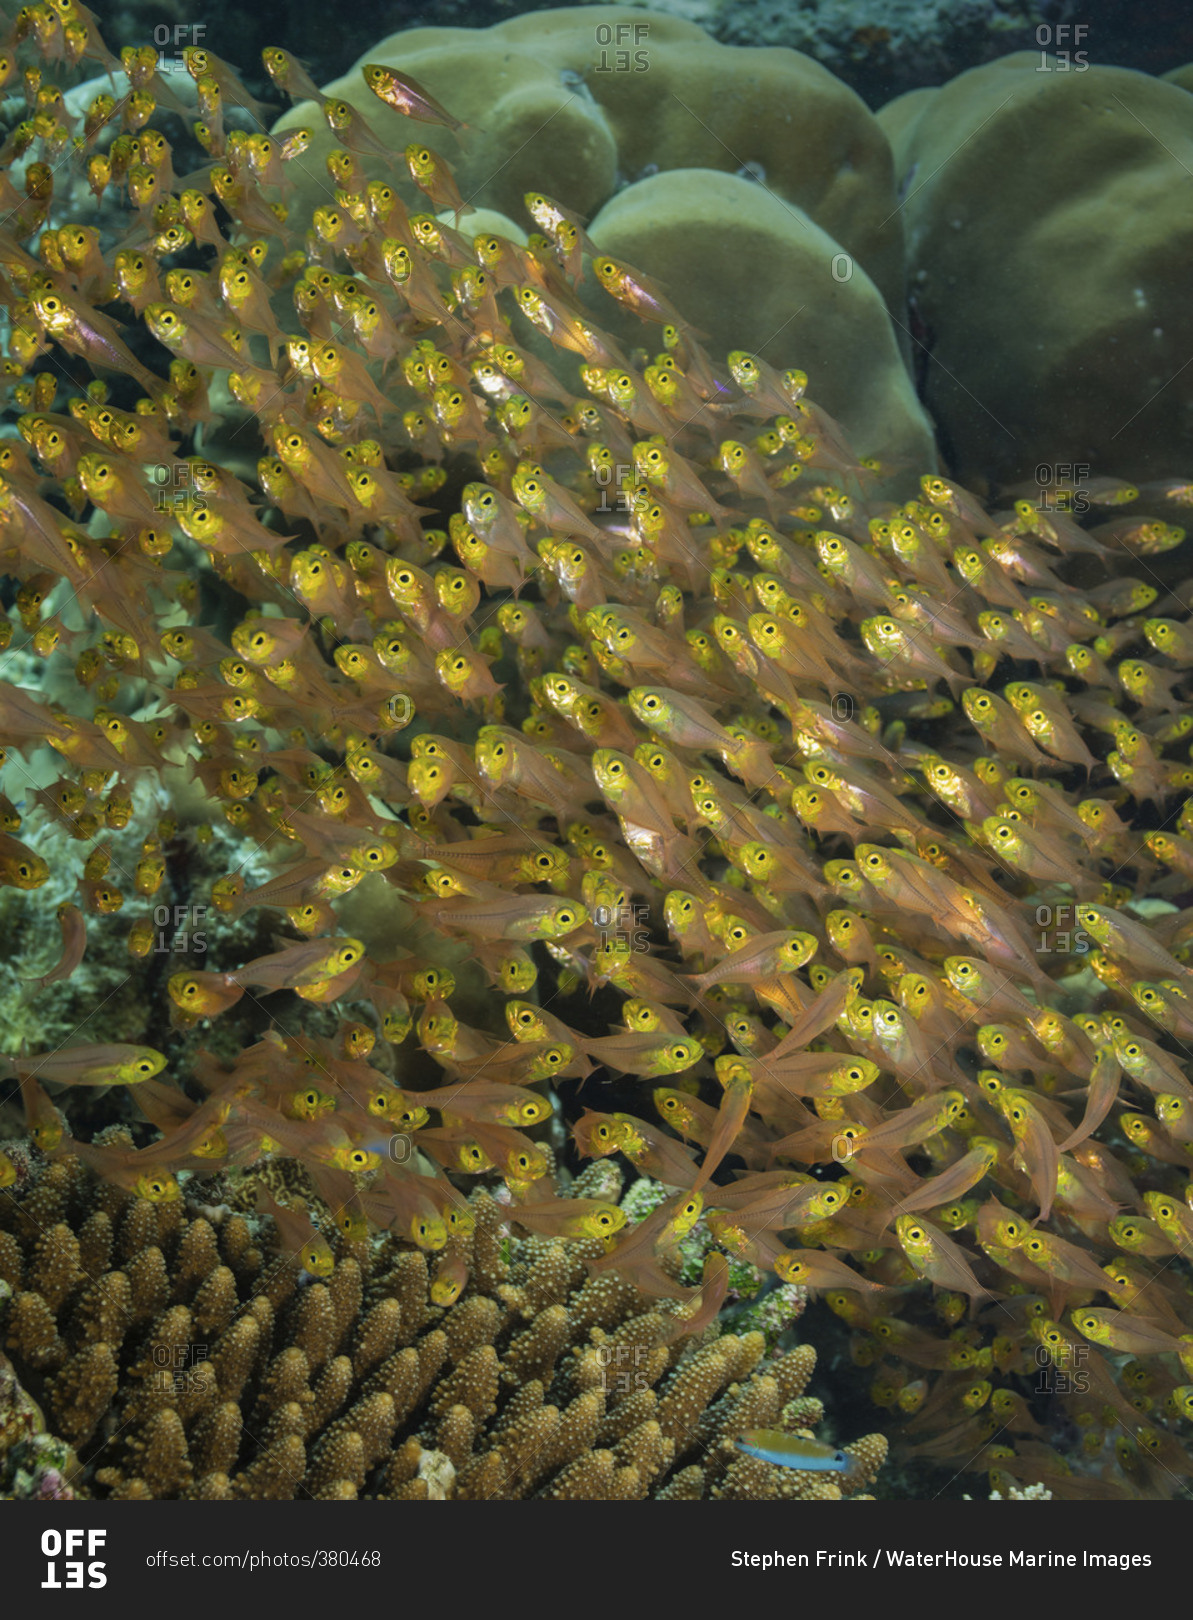 A waterfall of Pygmy sweepers (Parapriacanthus ransonneti), Maldives